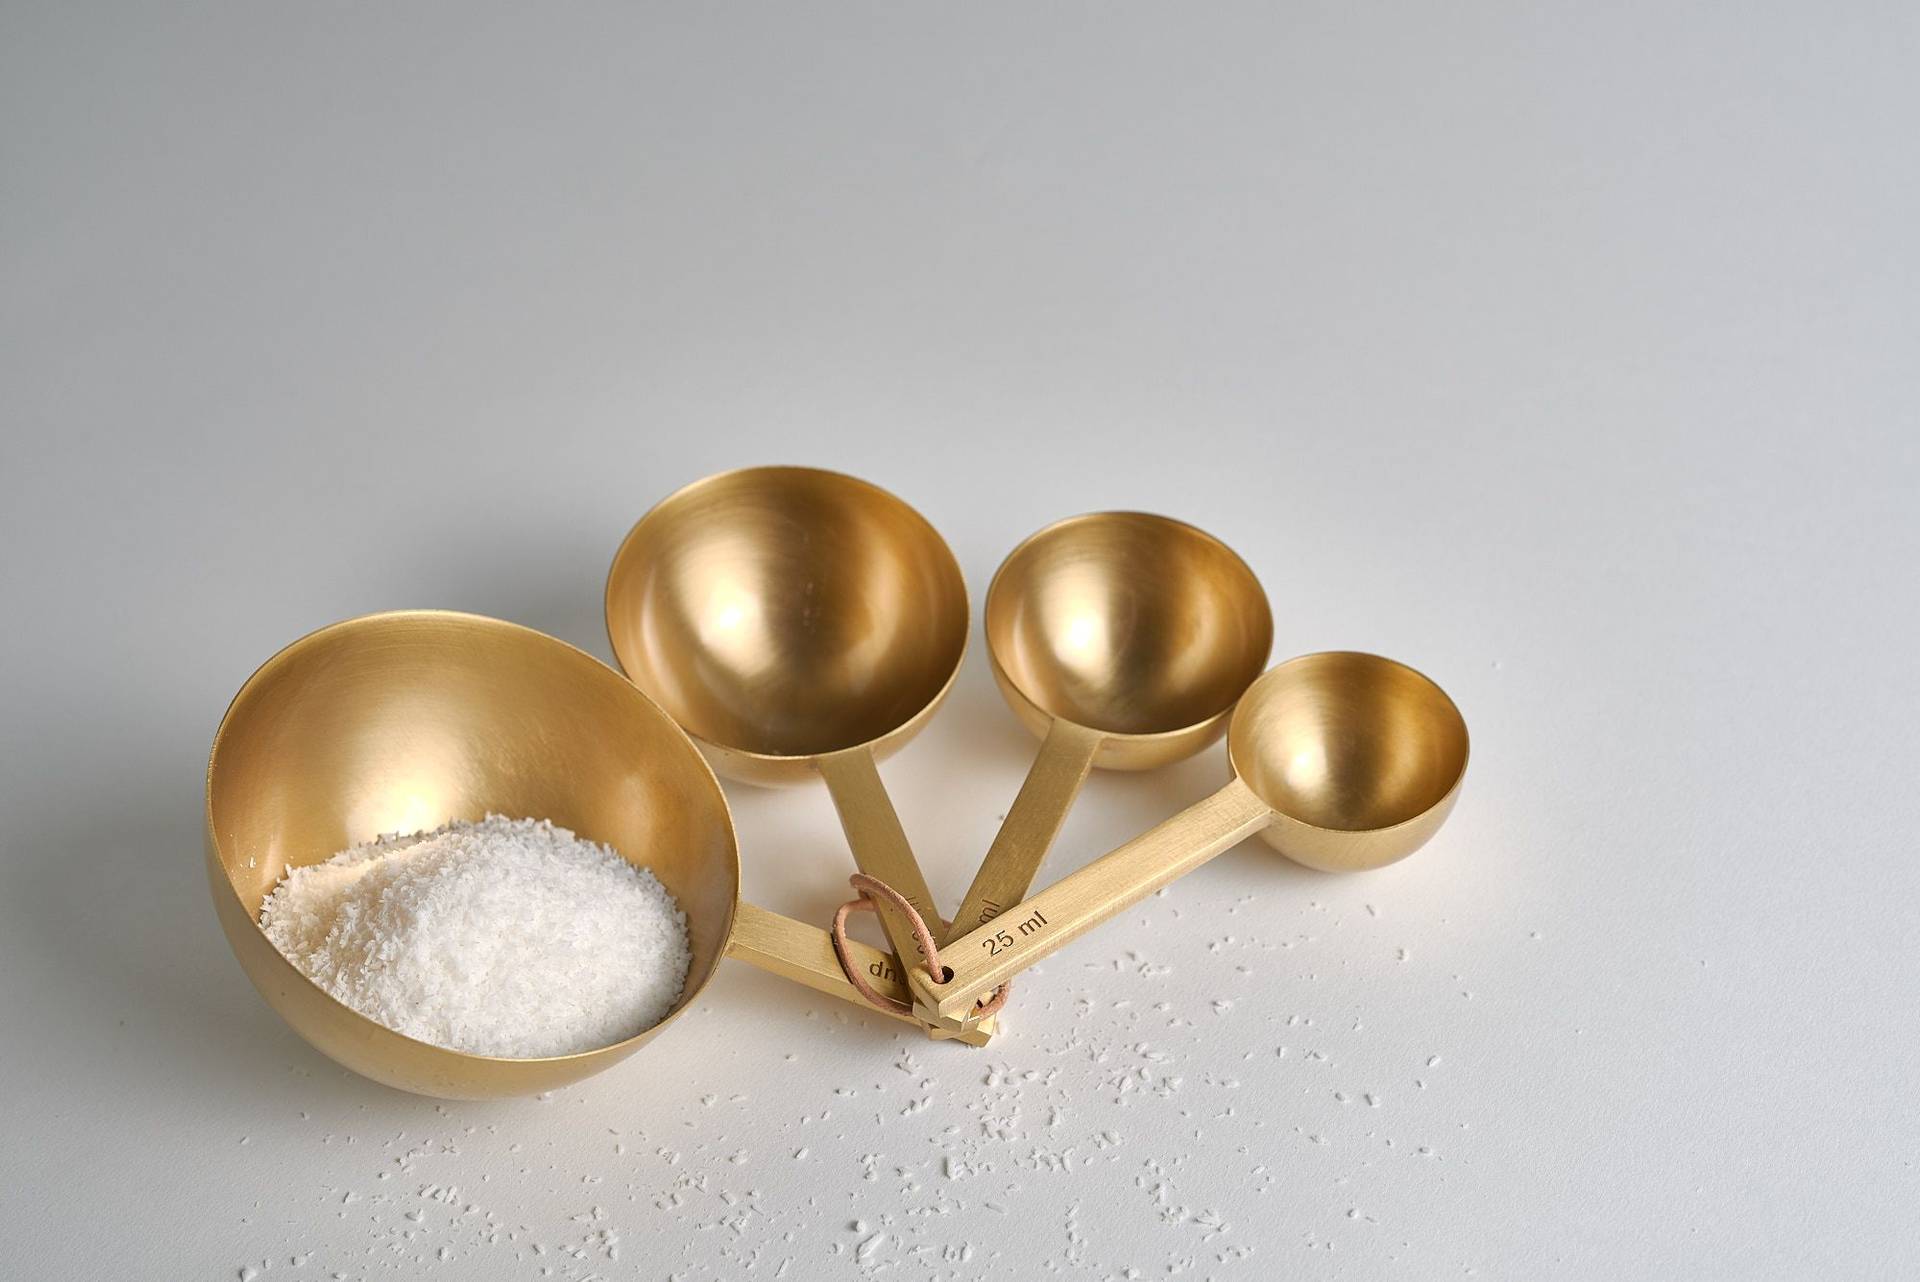 ground coconut in brass measuring spoons on white background